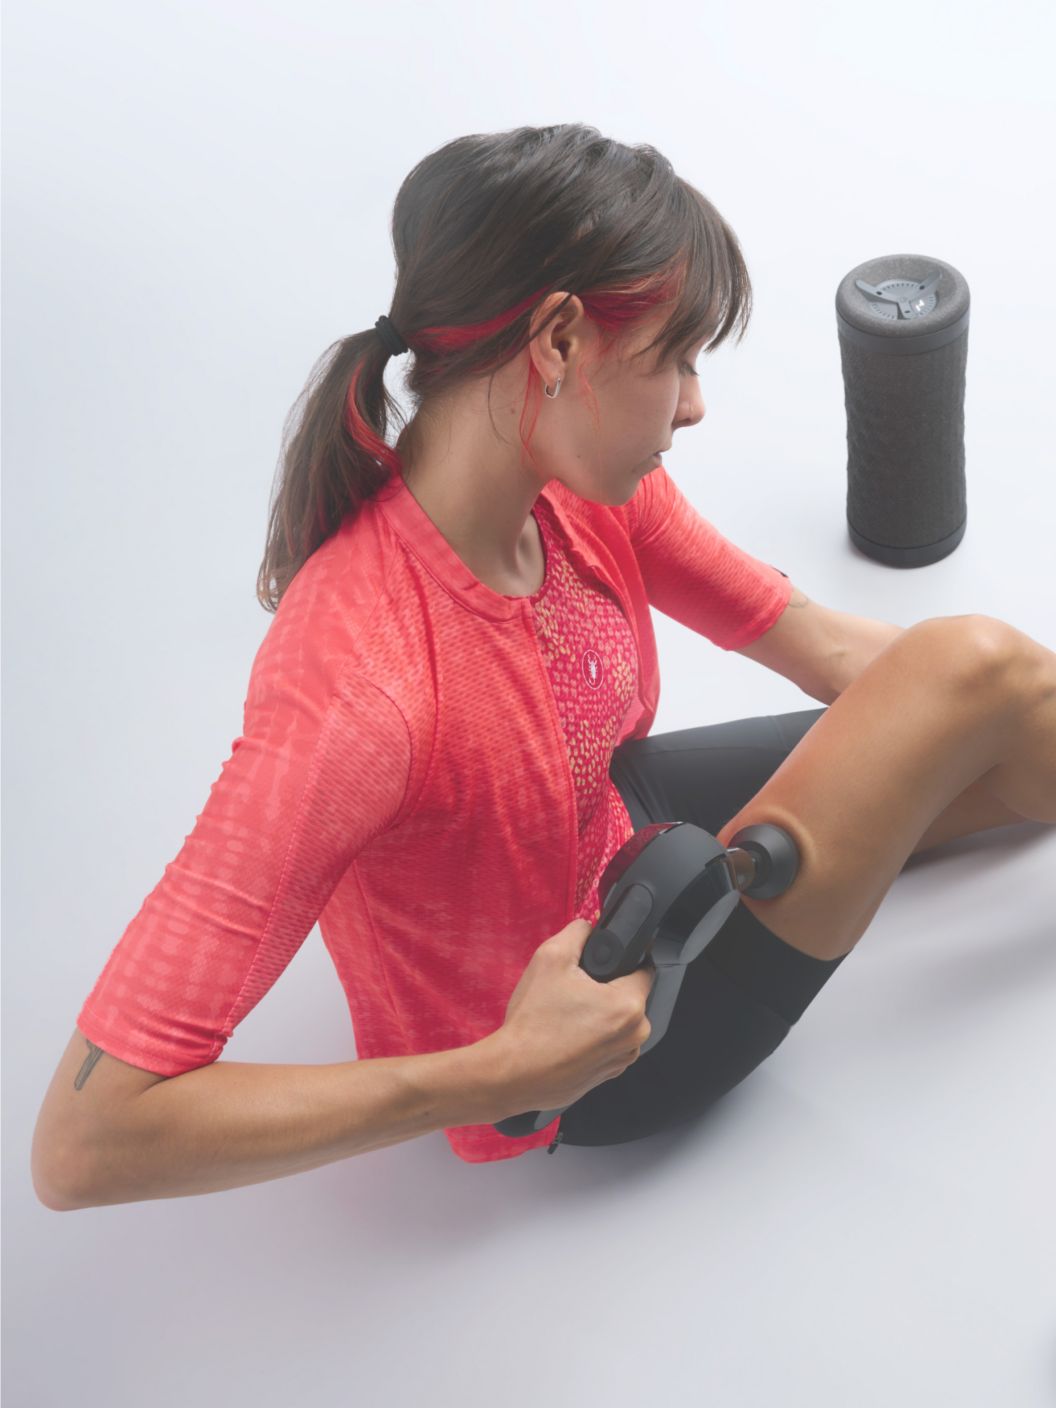 A rider sits on the floor while using a Theragun Elite percussion massager on their leg. A Hyperice massage roller is seen next to them. 